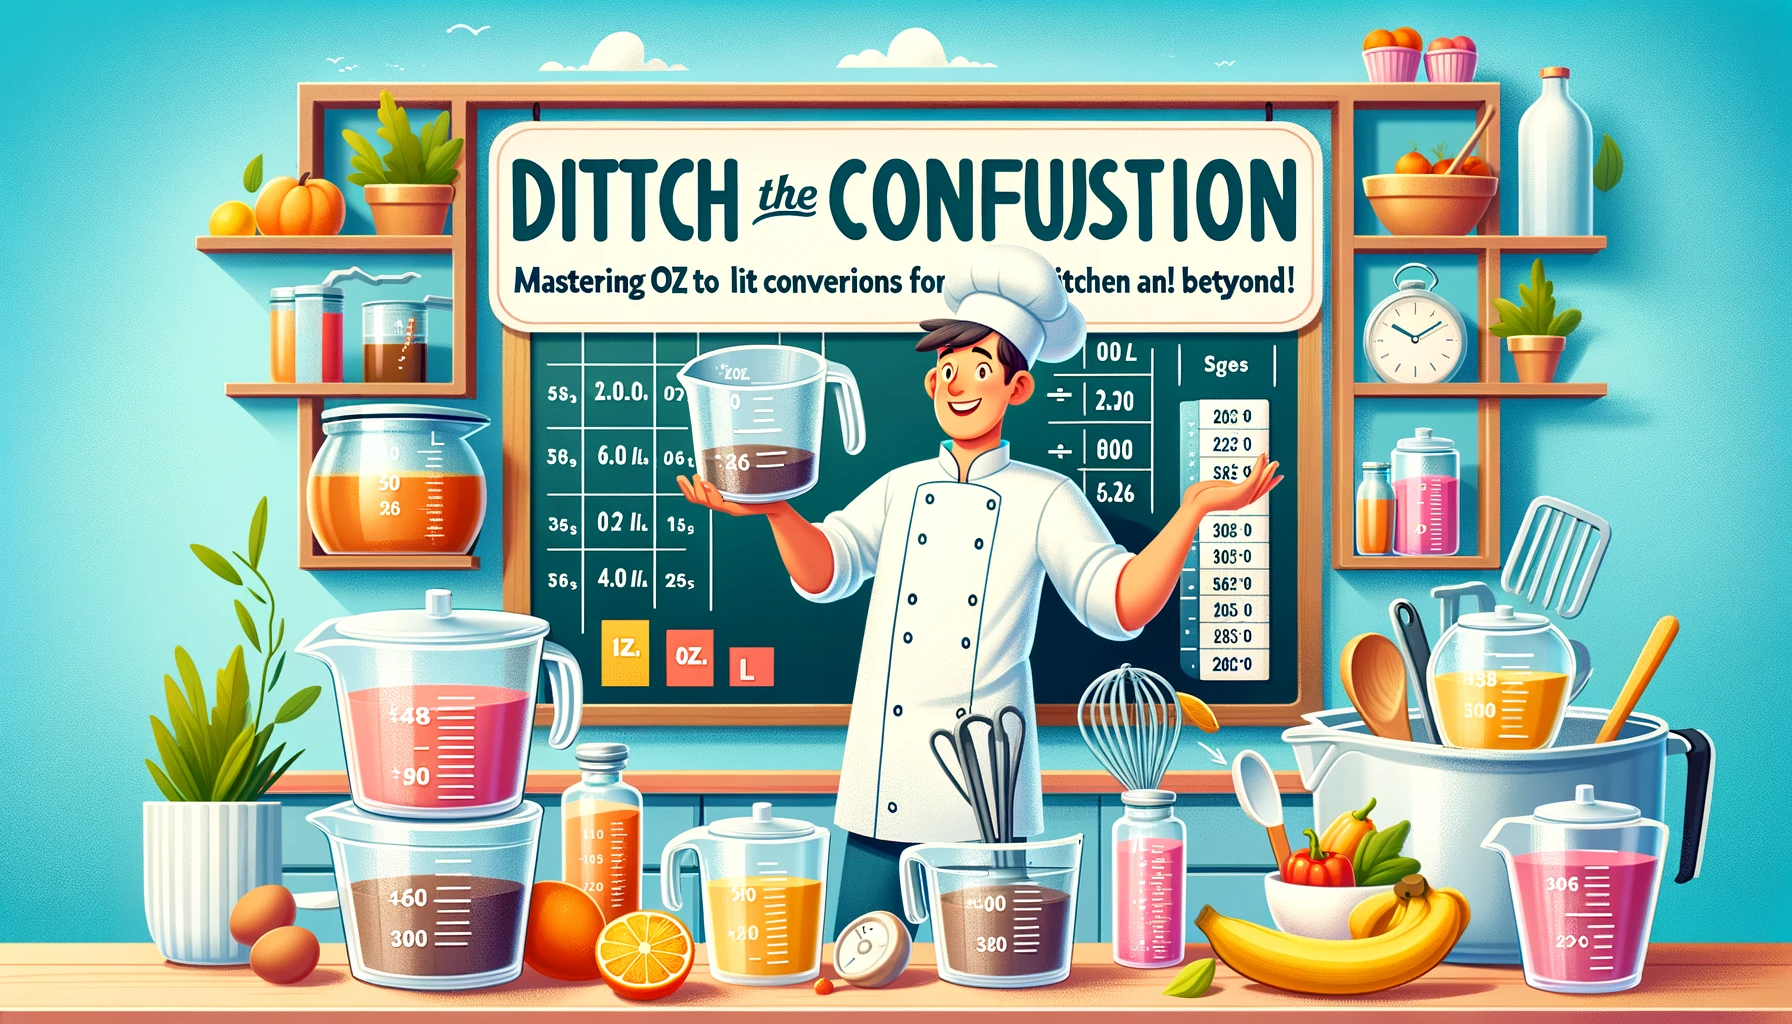 An educational and engaging blog header image for an article titled 'Ditch the Confusion_ Mastering Oz to Liter Conversions for a Hassle-Free Kitchen